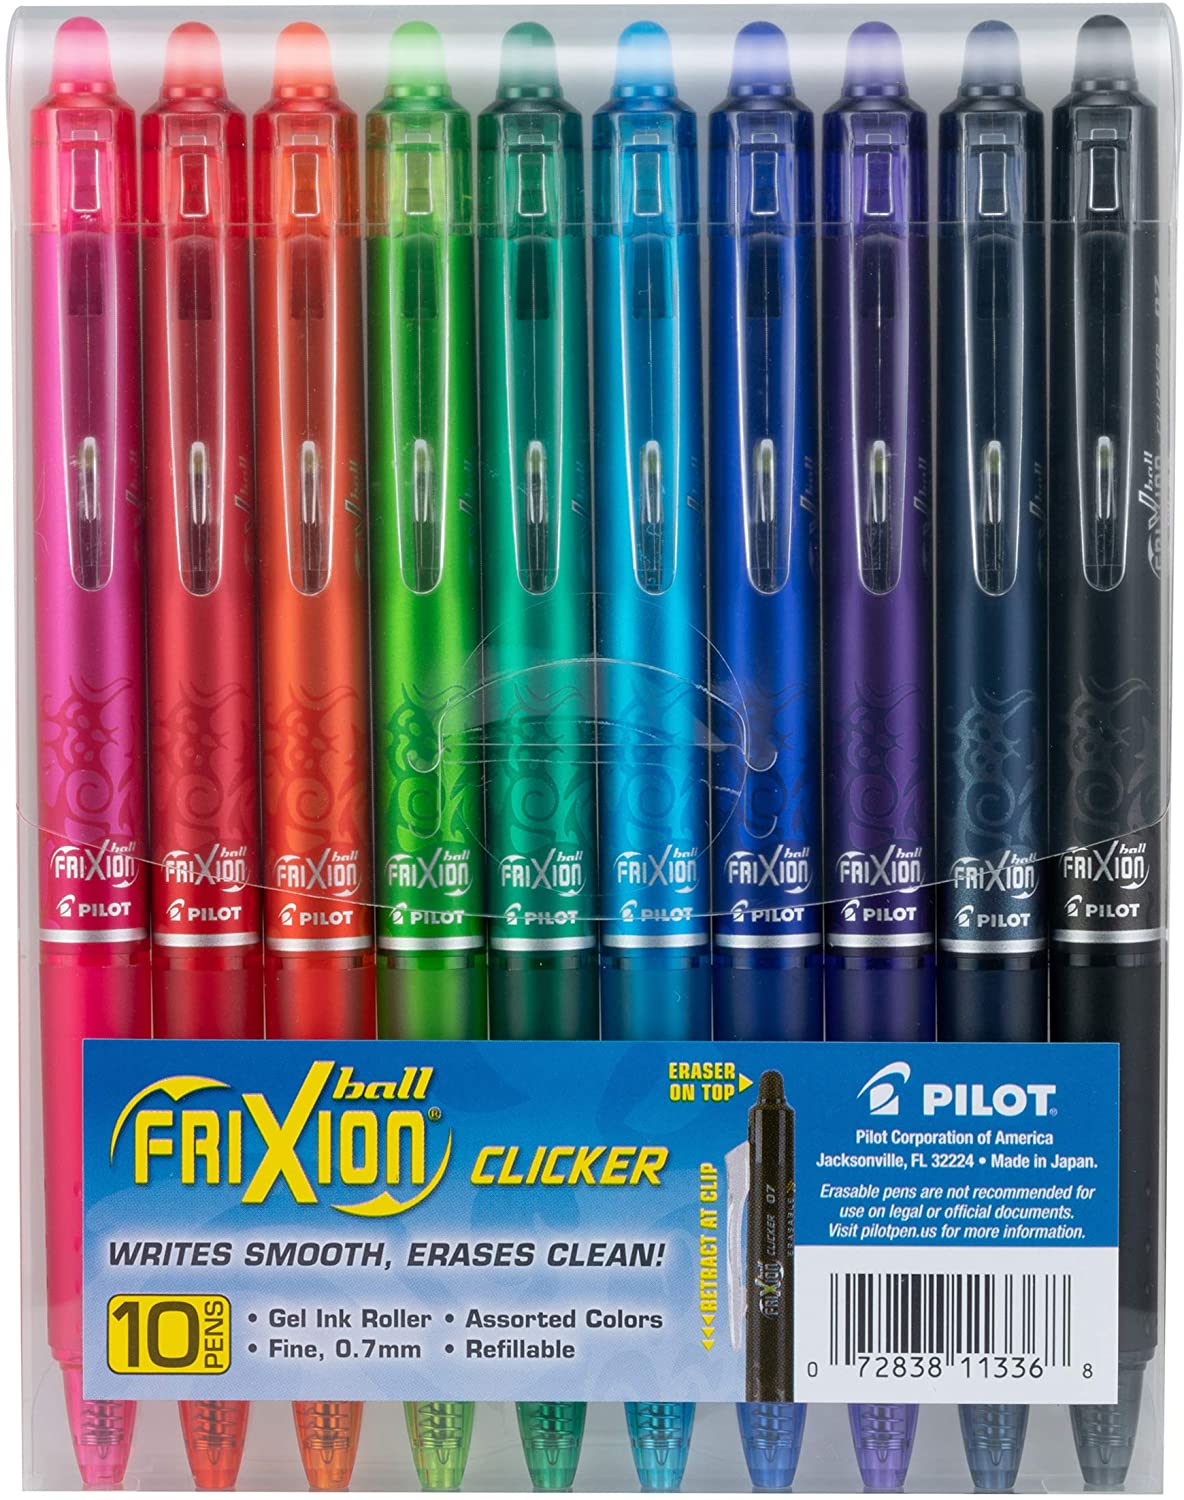 Piochoo Colored Pens,1.0mm 6 Assorted Colors Ballpoint Smooth Writing  Pens,Pens for School Journaling Note Taking, Retractable Color Pens for  Writing